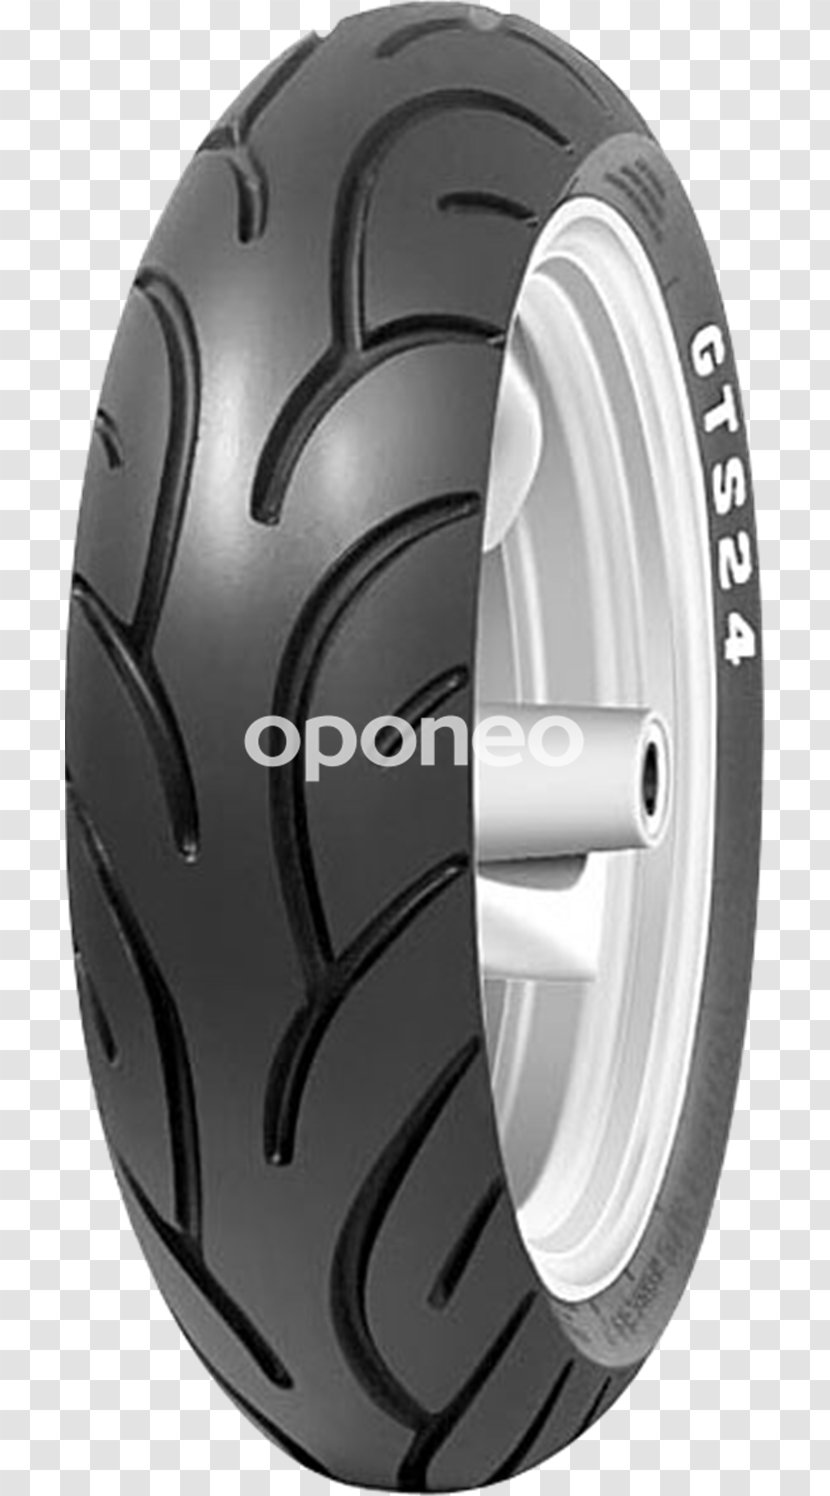 Scooter Car Pirelli Tire Motorcycle Transparent PNG